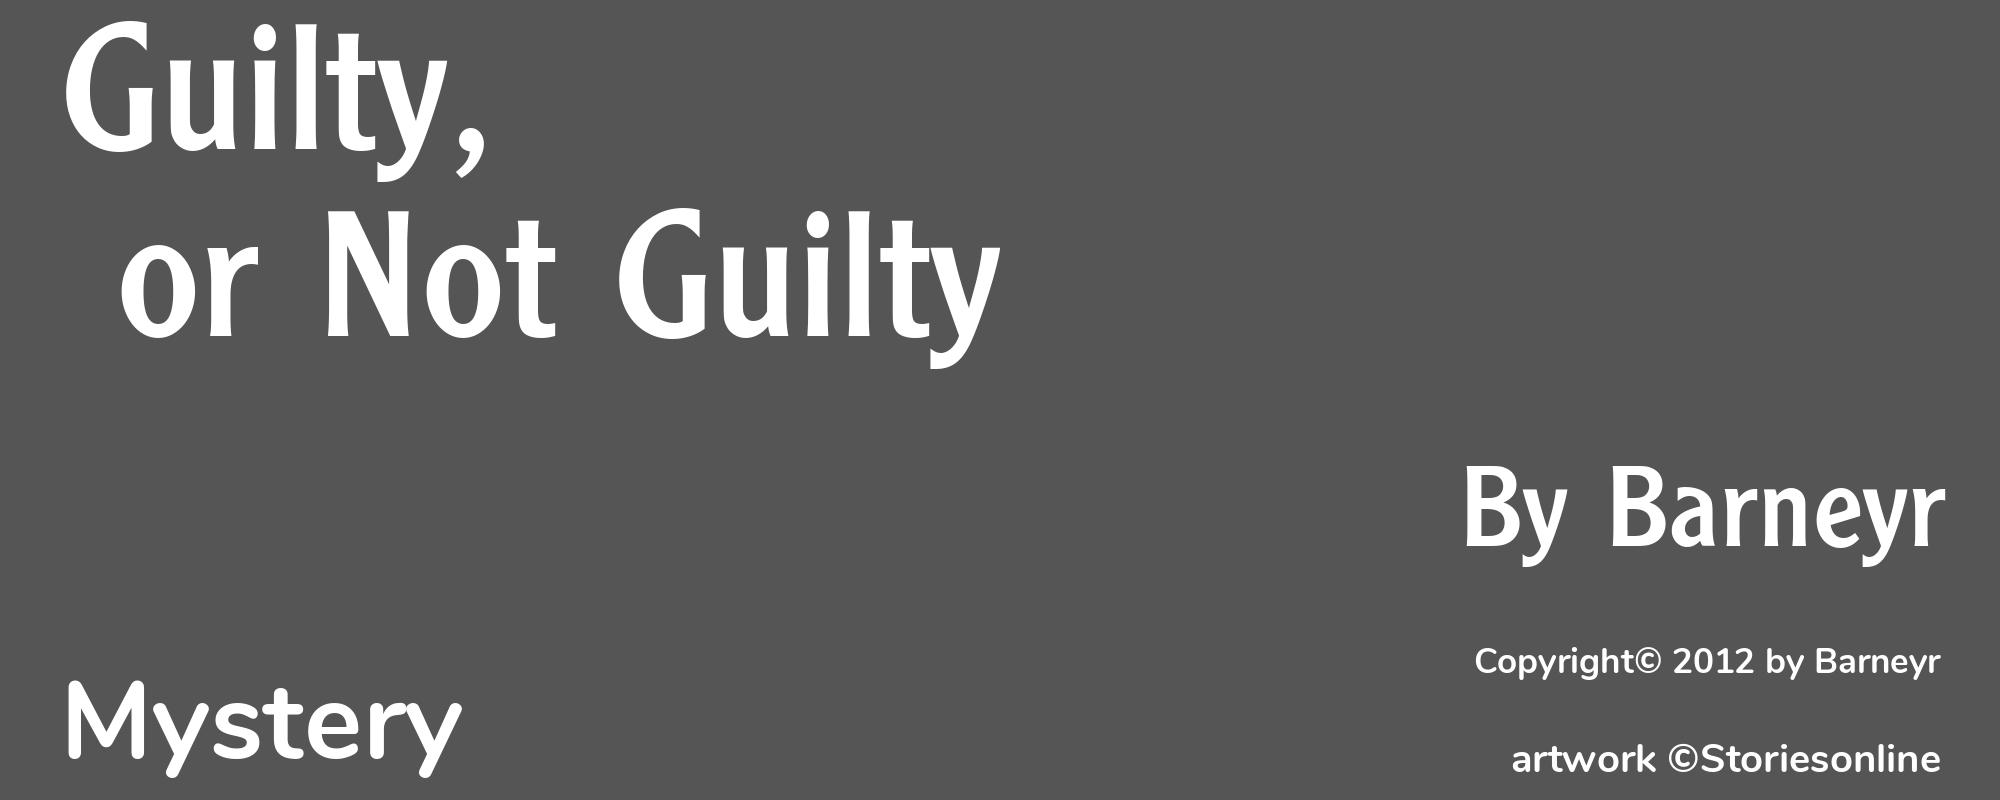 Guilty, or Not Guilty - Cover